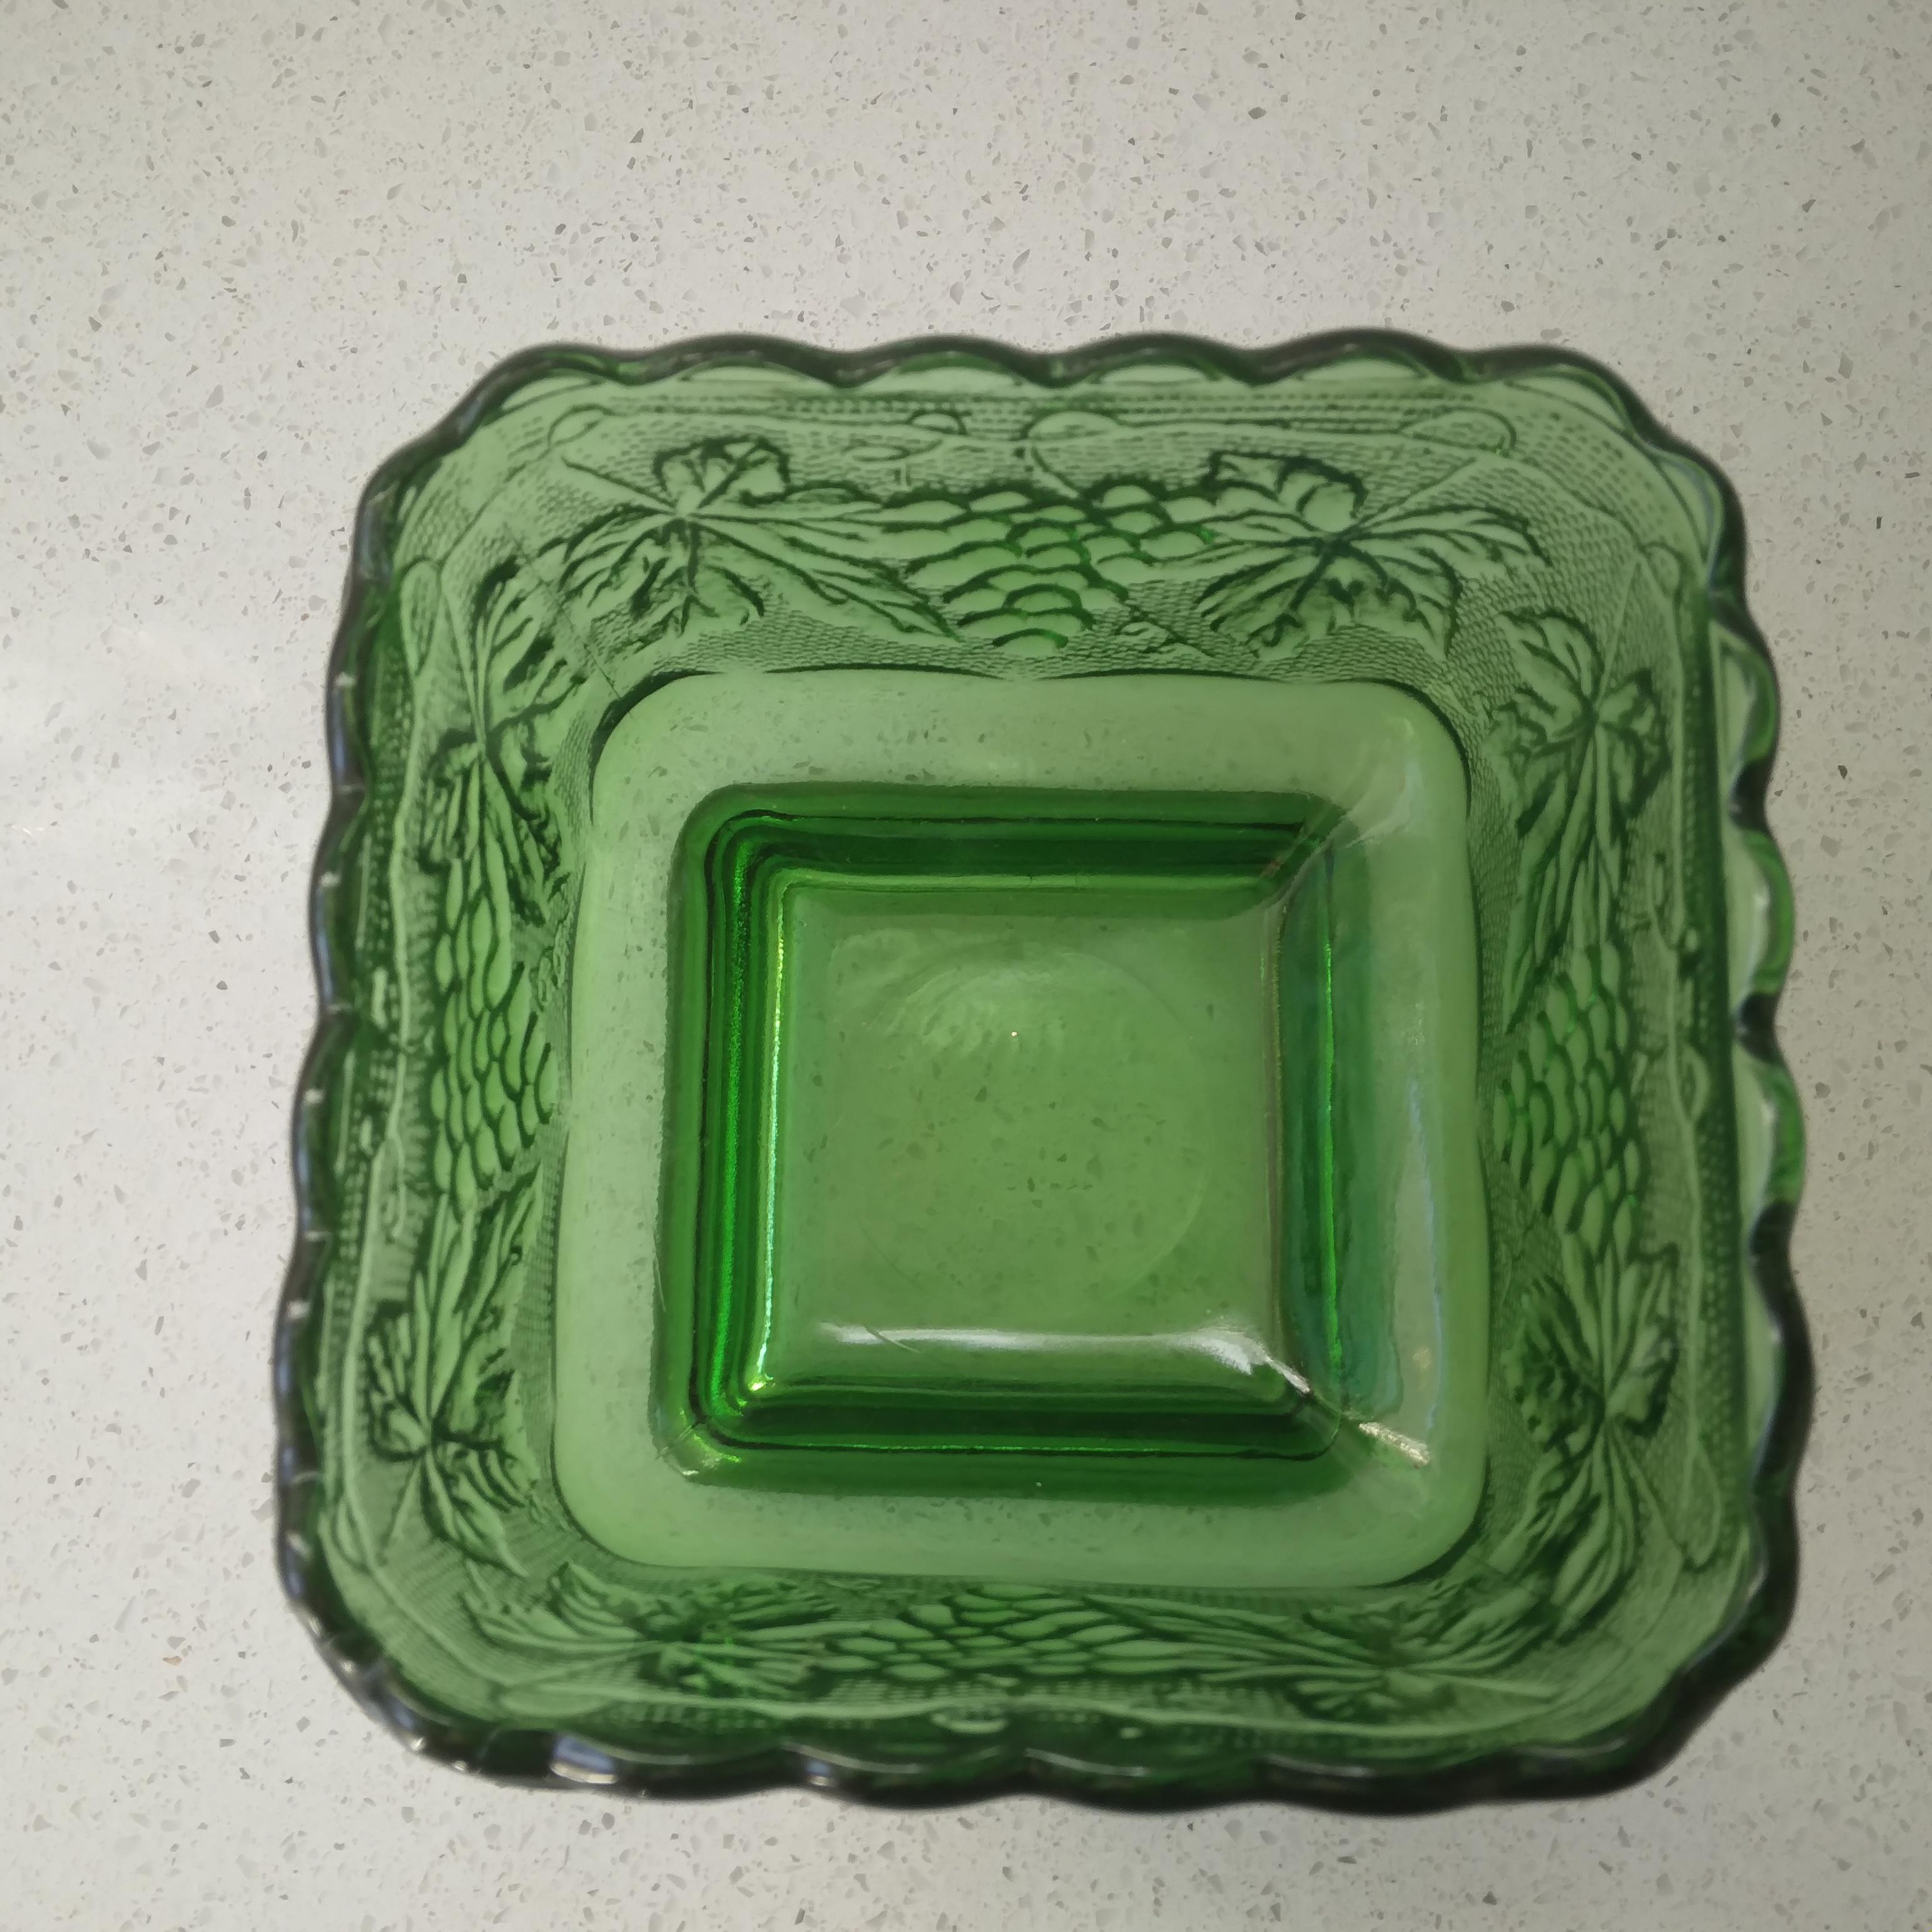 American Vintage Green Glass Pedestal Dish featuring Grape Vine Pattern For Sale